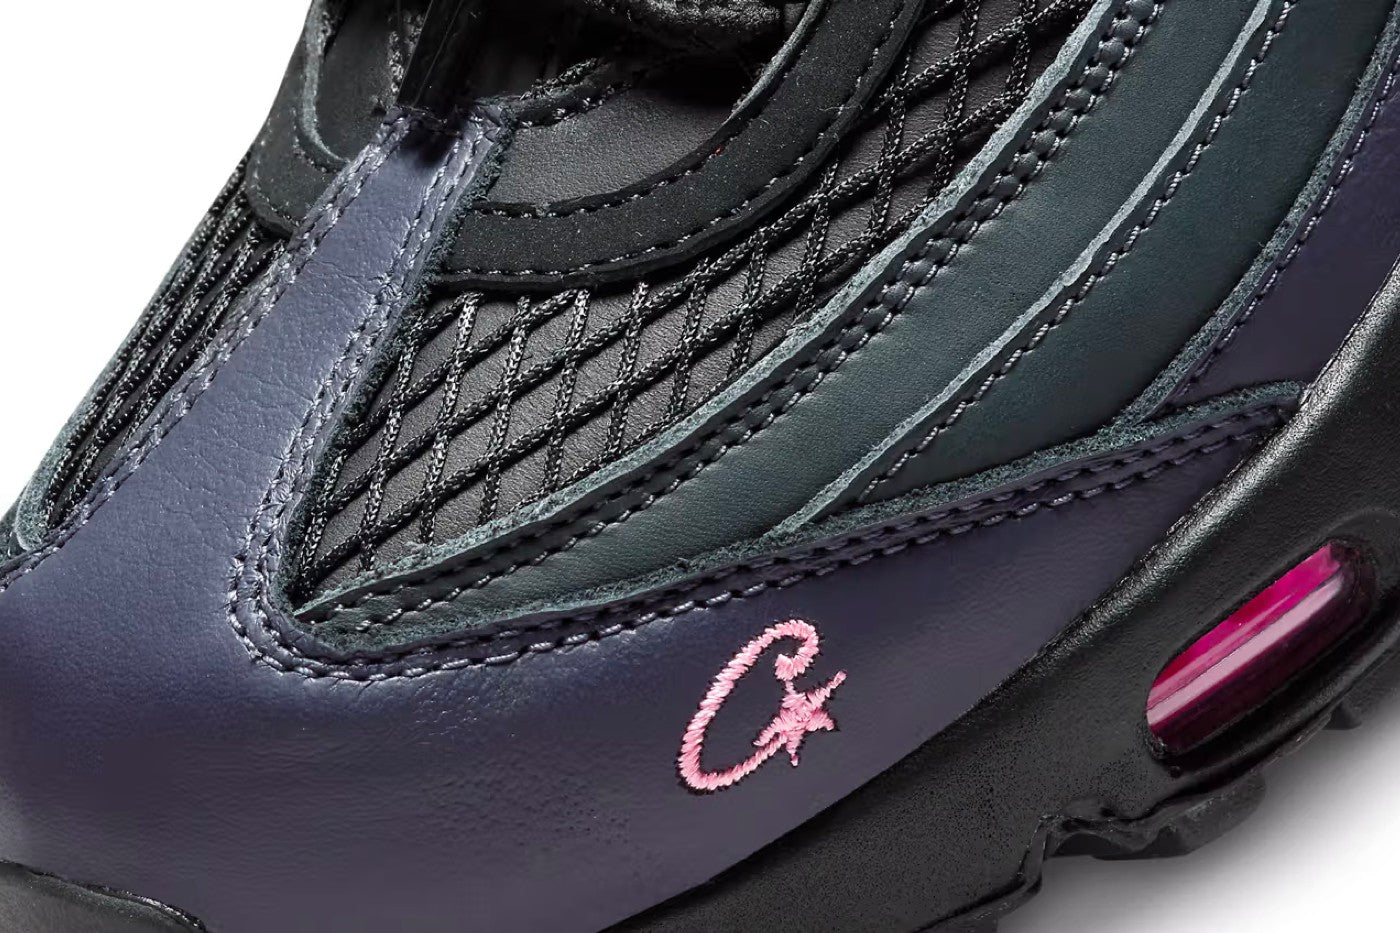 The Corteiz x Nike Air Max 95 "Pink Beam" is Exclusive to NYC